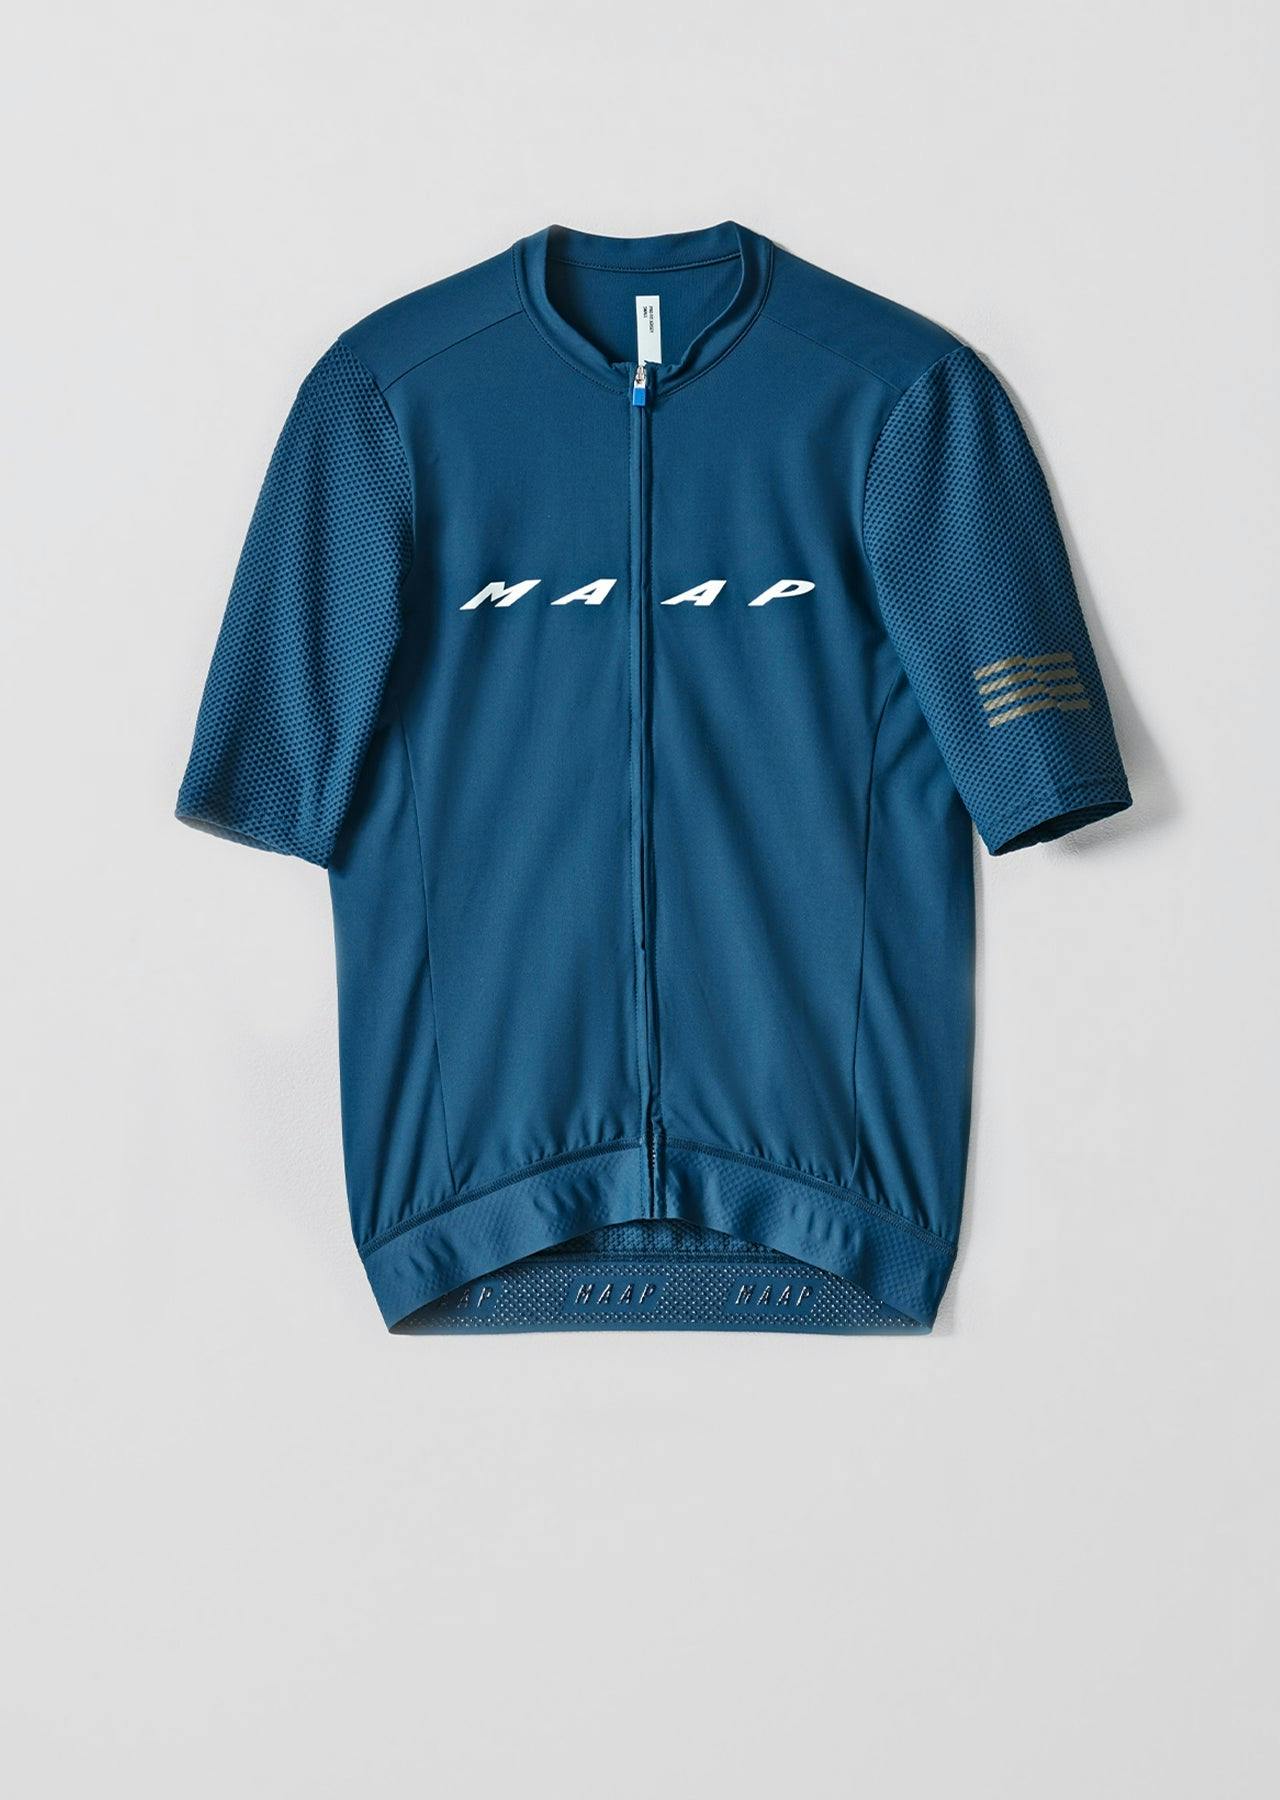 Cycling Clothing Sale | Cycling Jersey Sale | MAAP